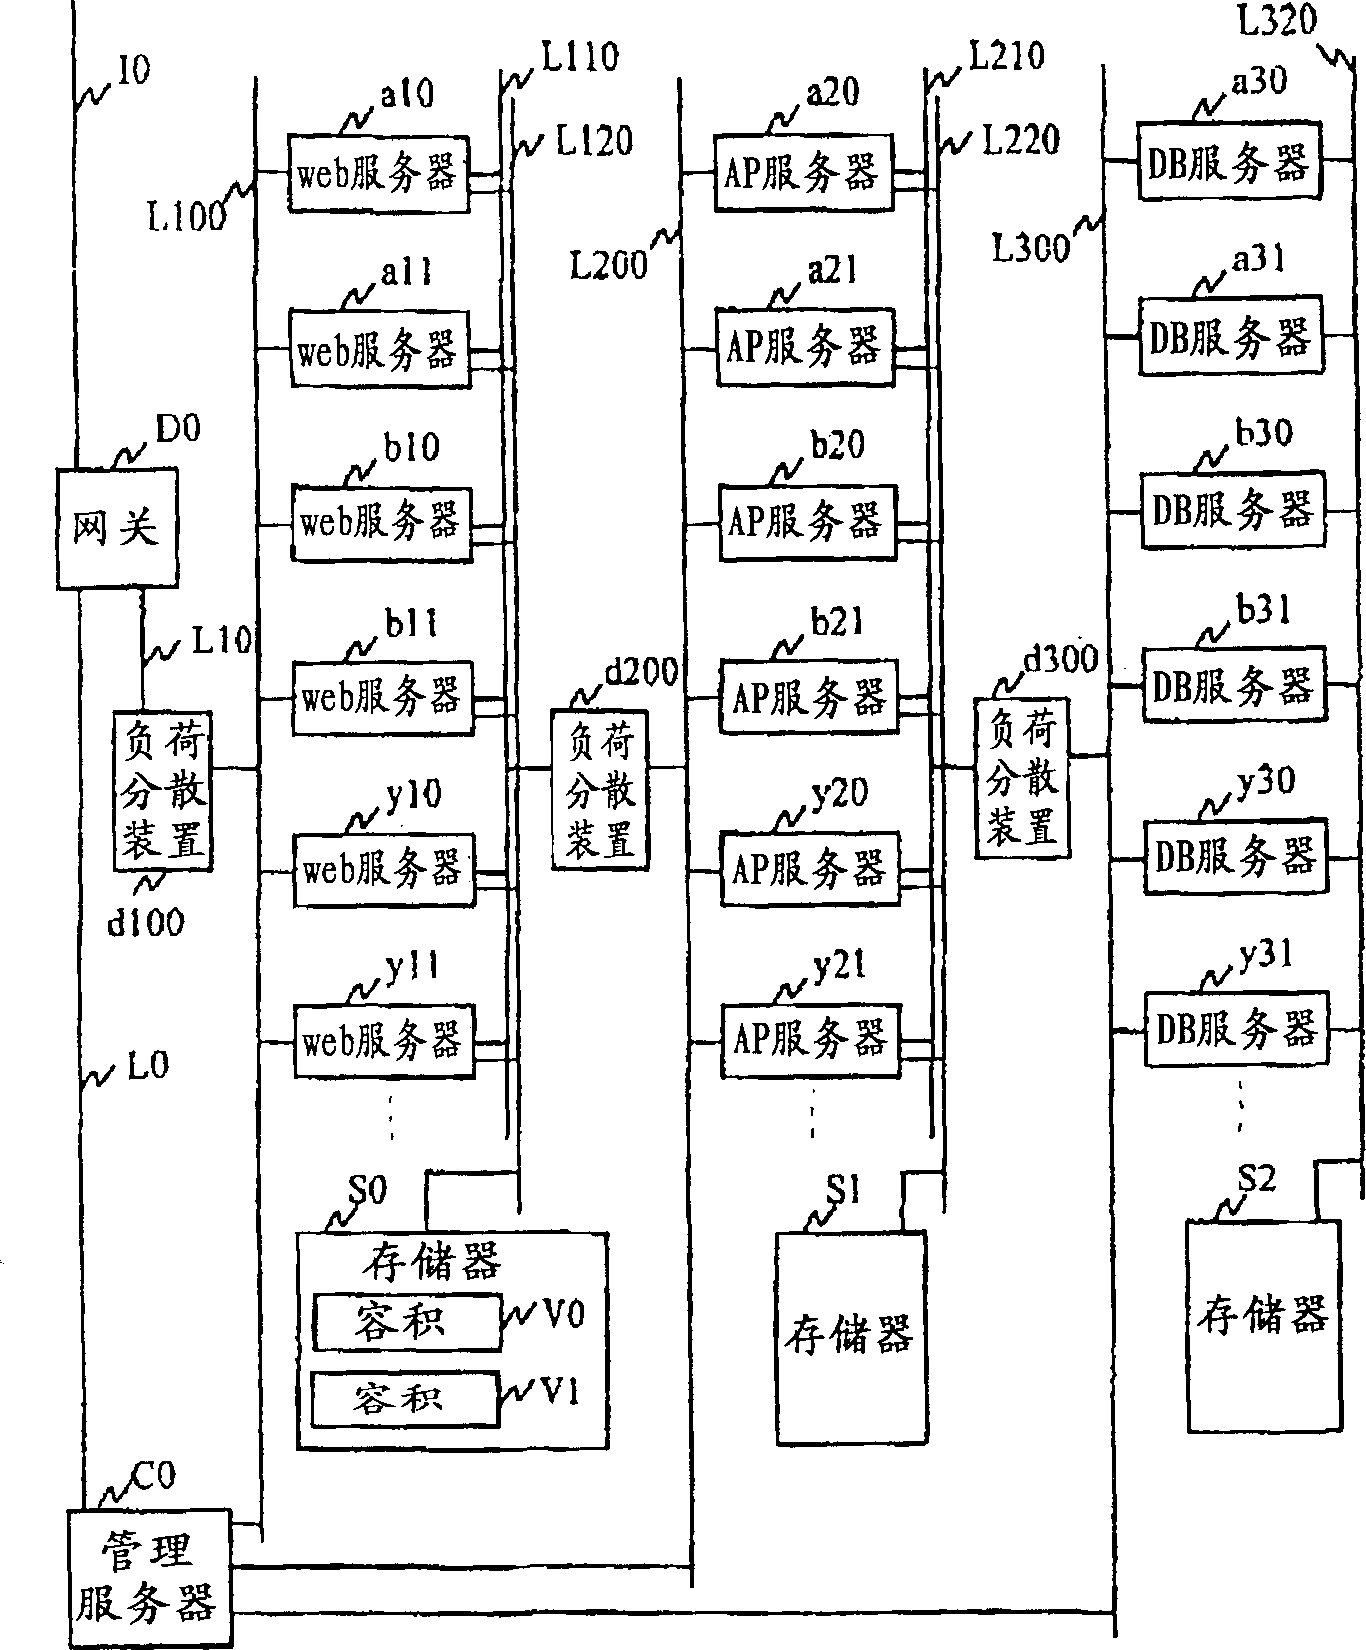 Device and method for dynamic distributing computer resource according to user's agreement